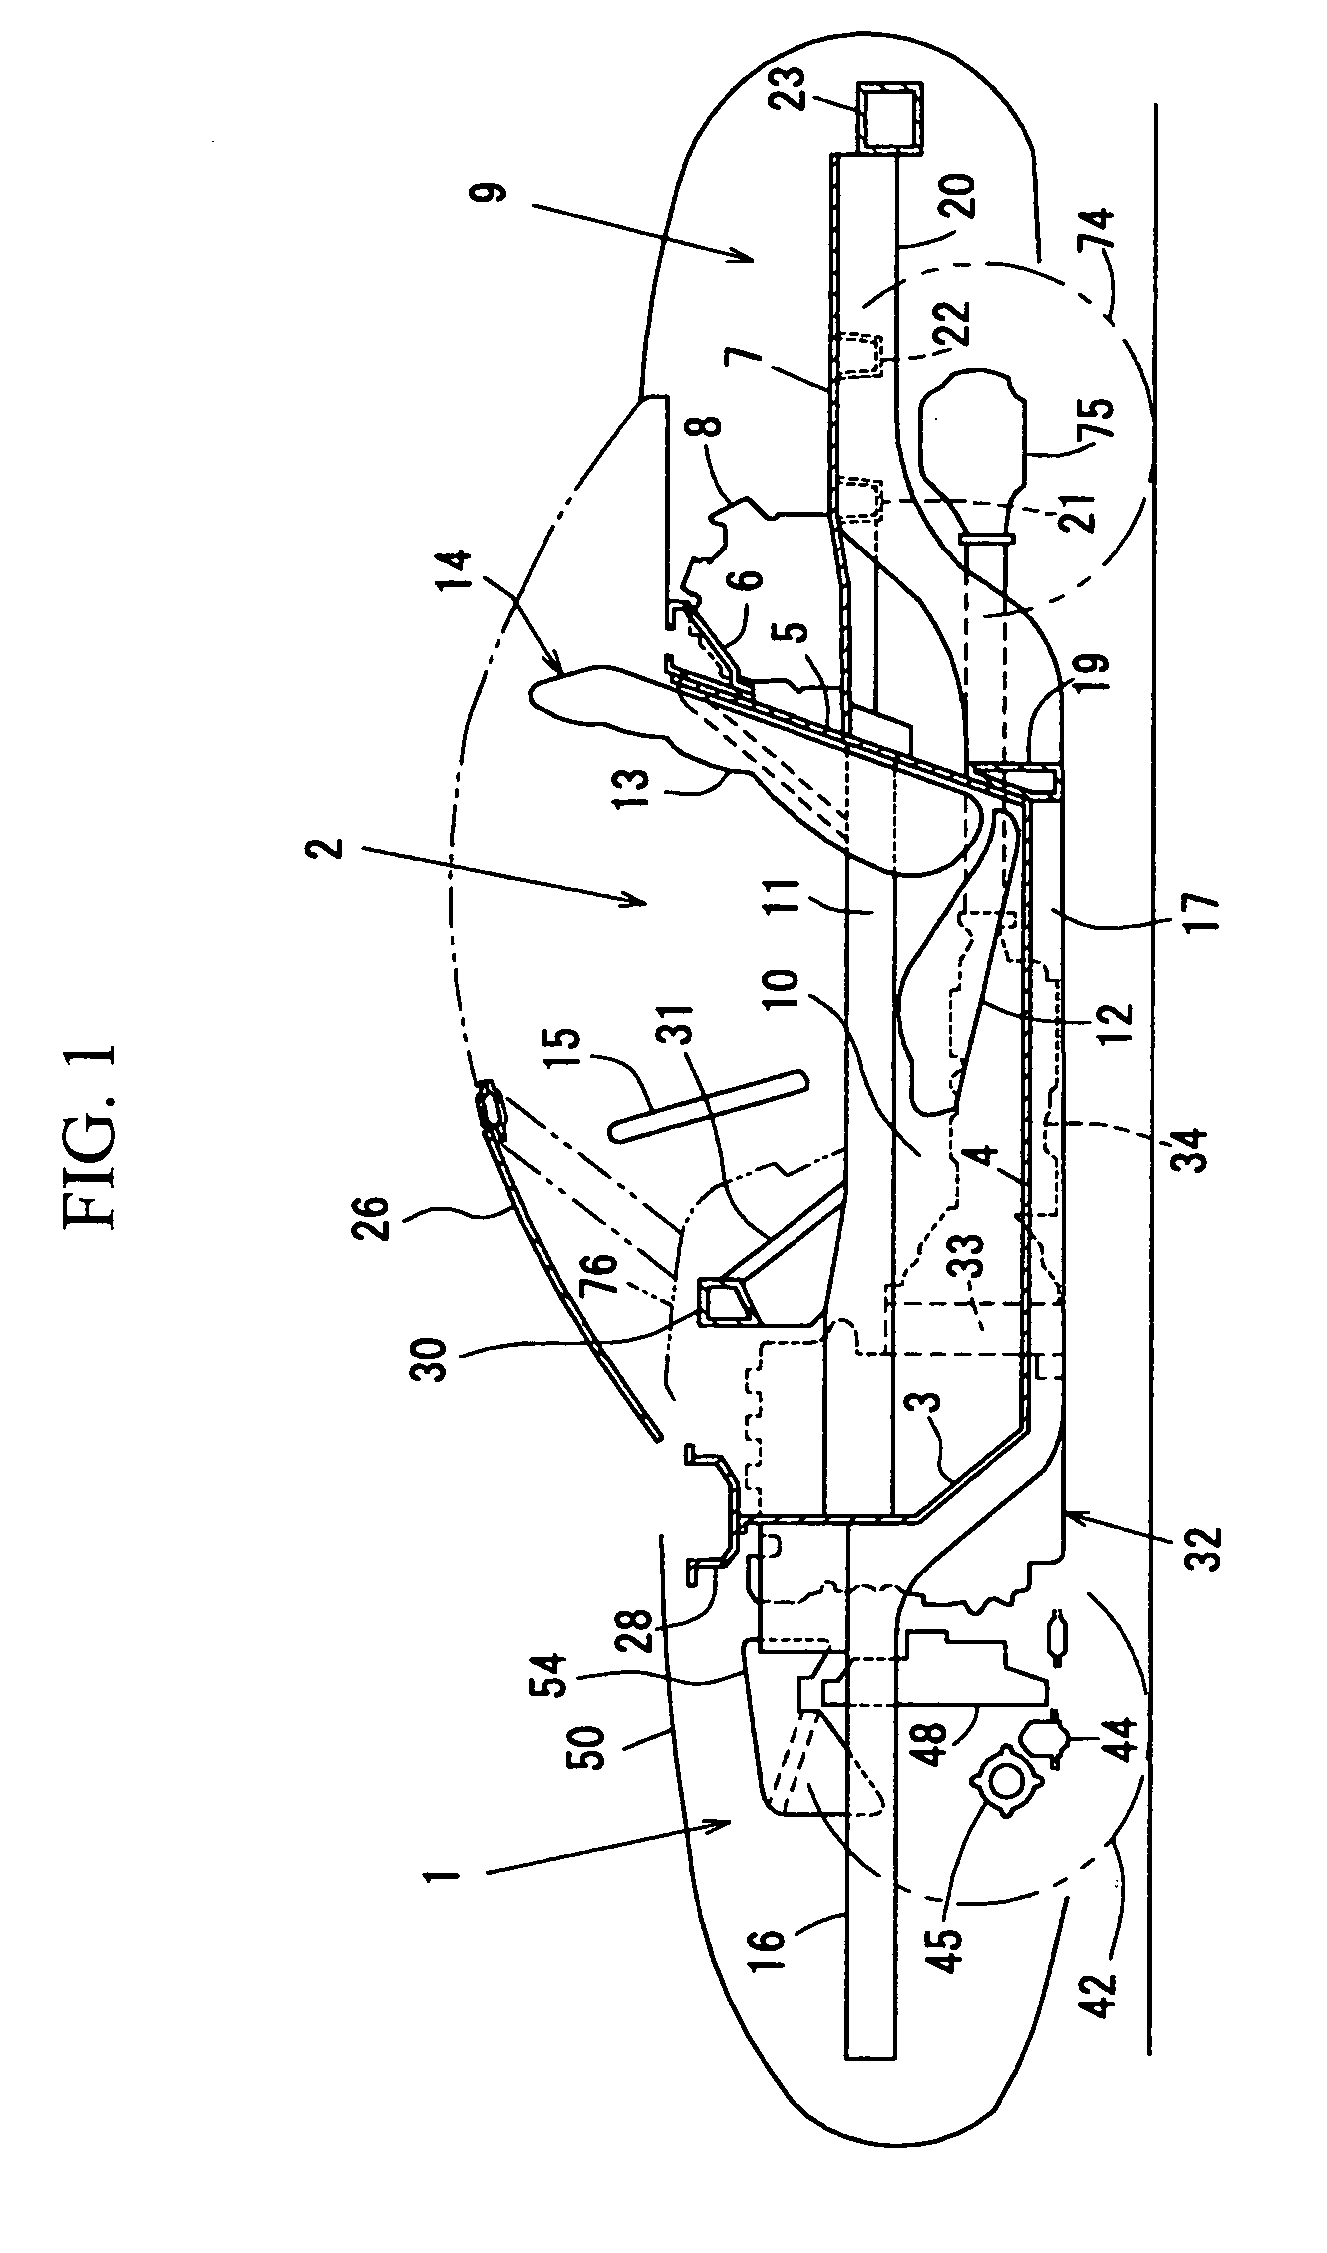 Layout structure of driving device for vehicle